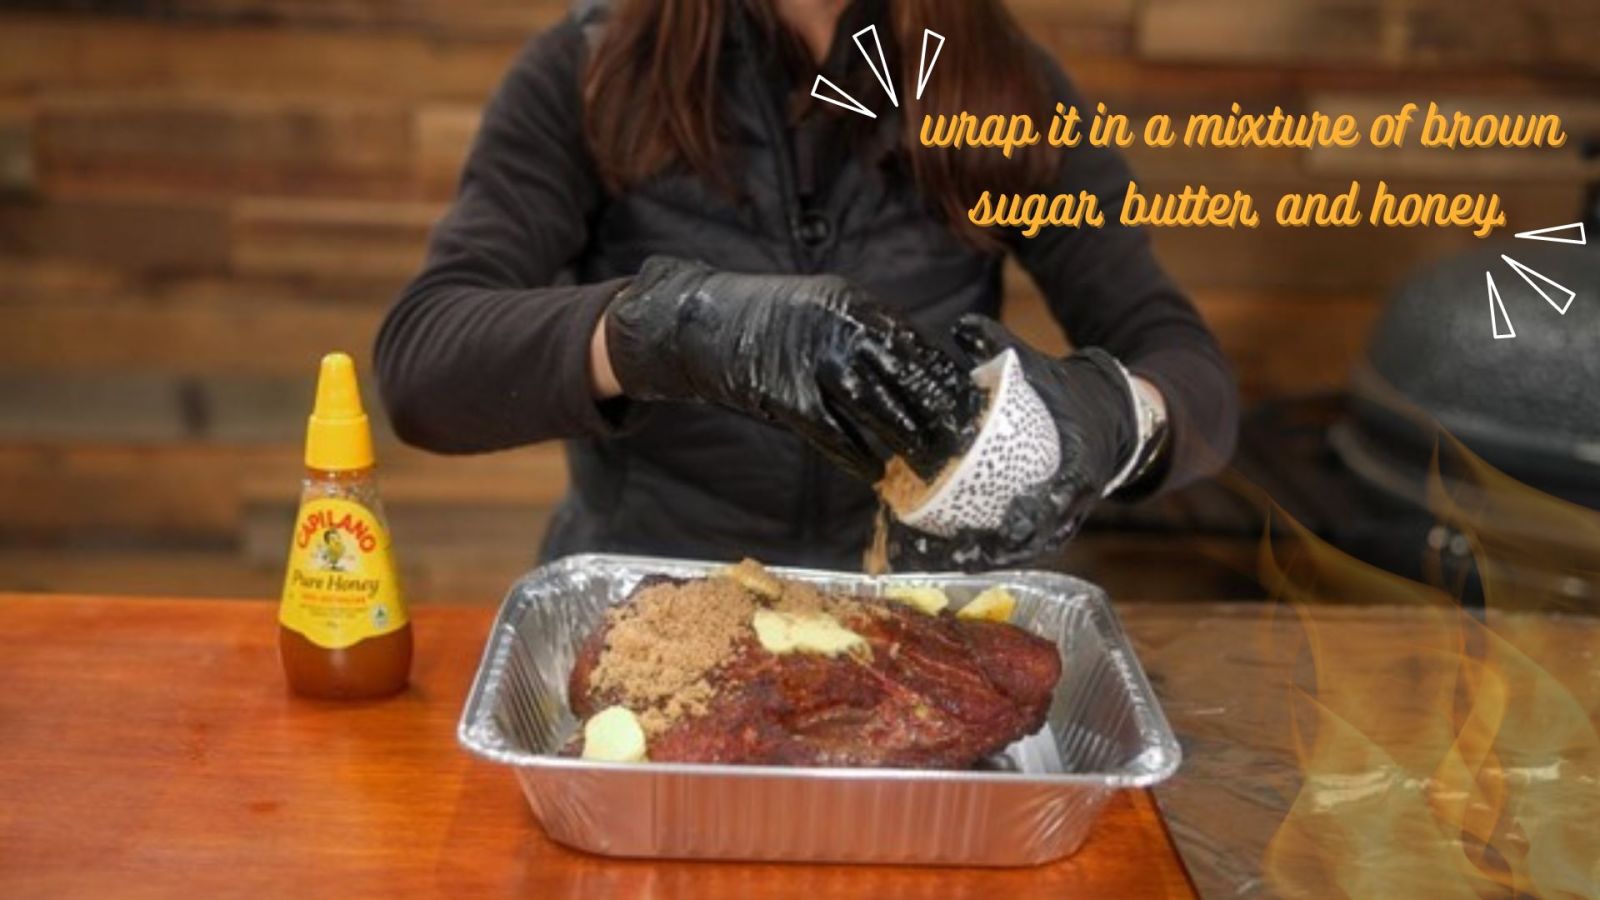 This_image_shows_adding_sugar_butter_and_honey_to_the_pork_butt